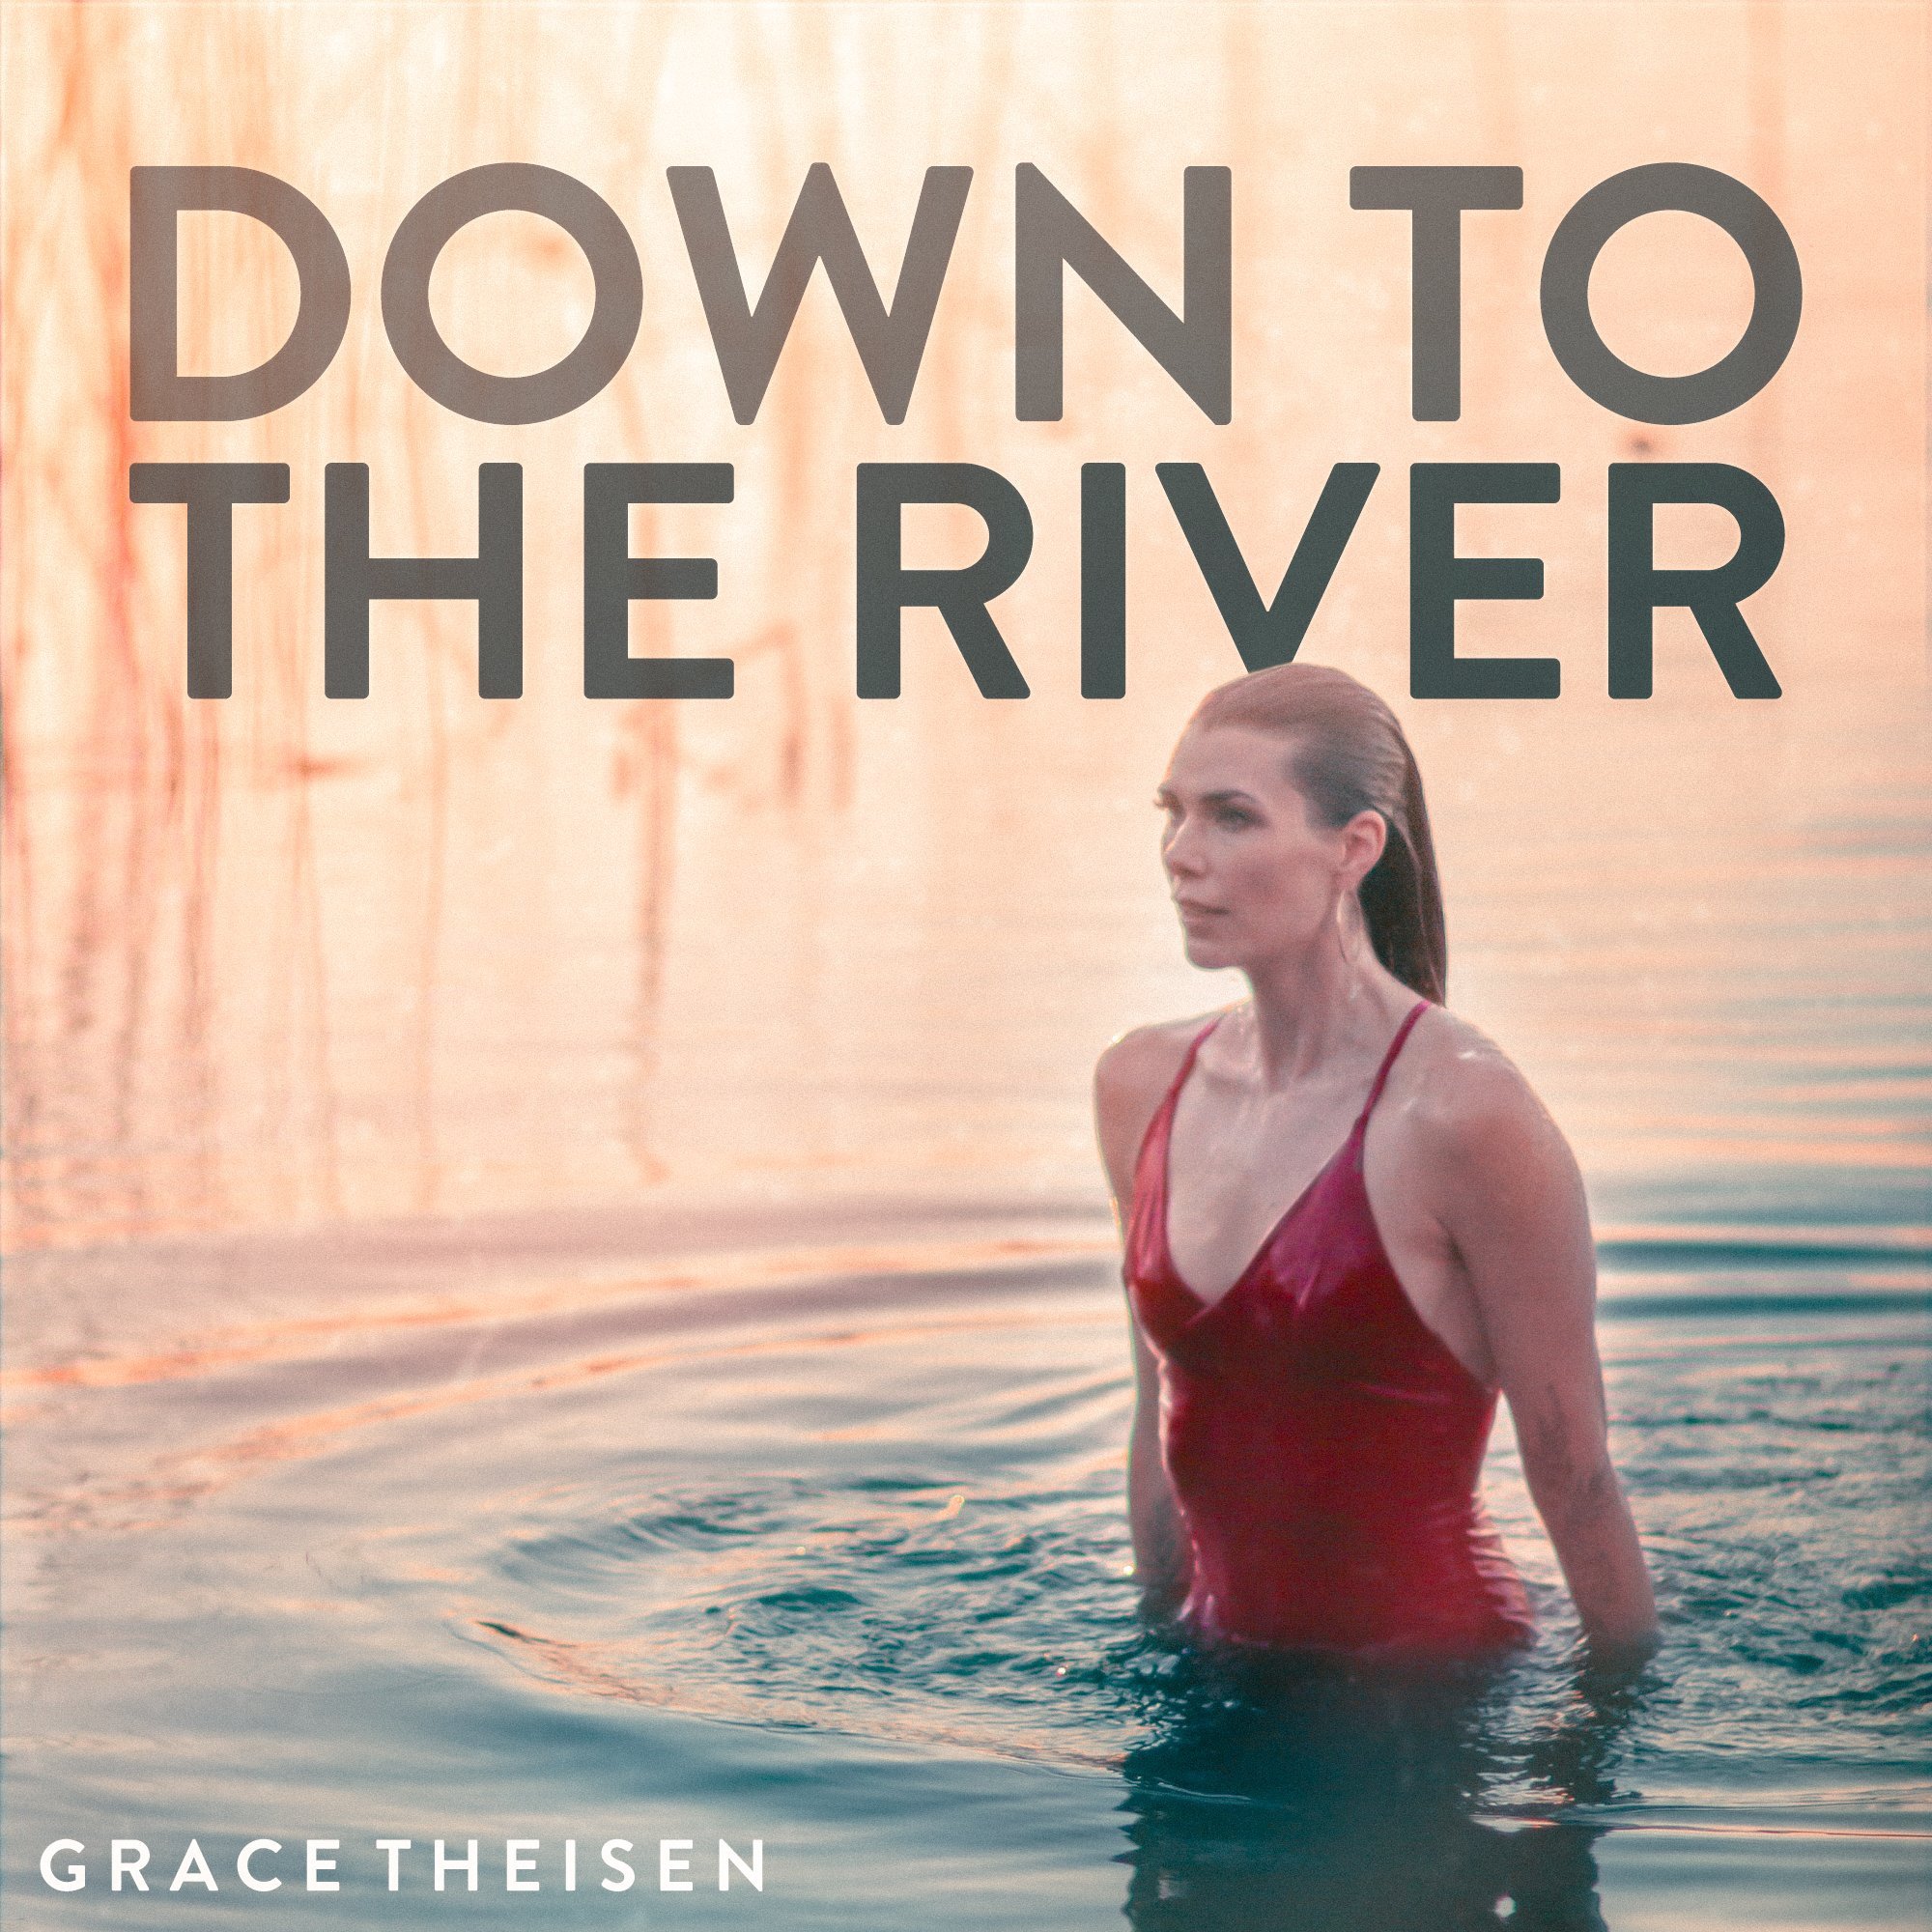 Down To The River-Single cover.jpg